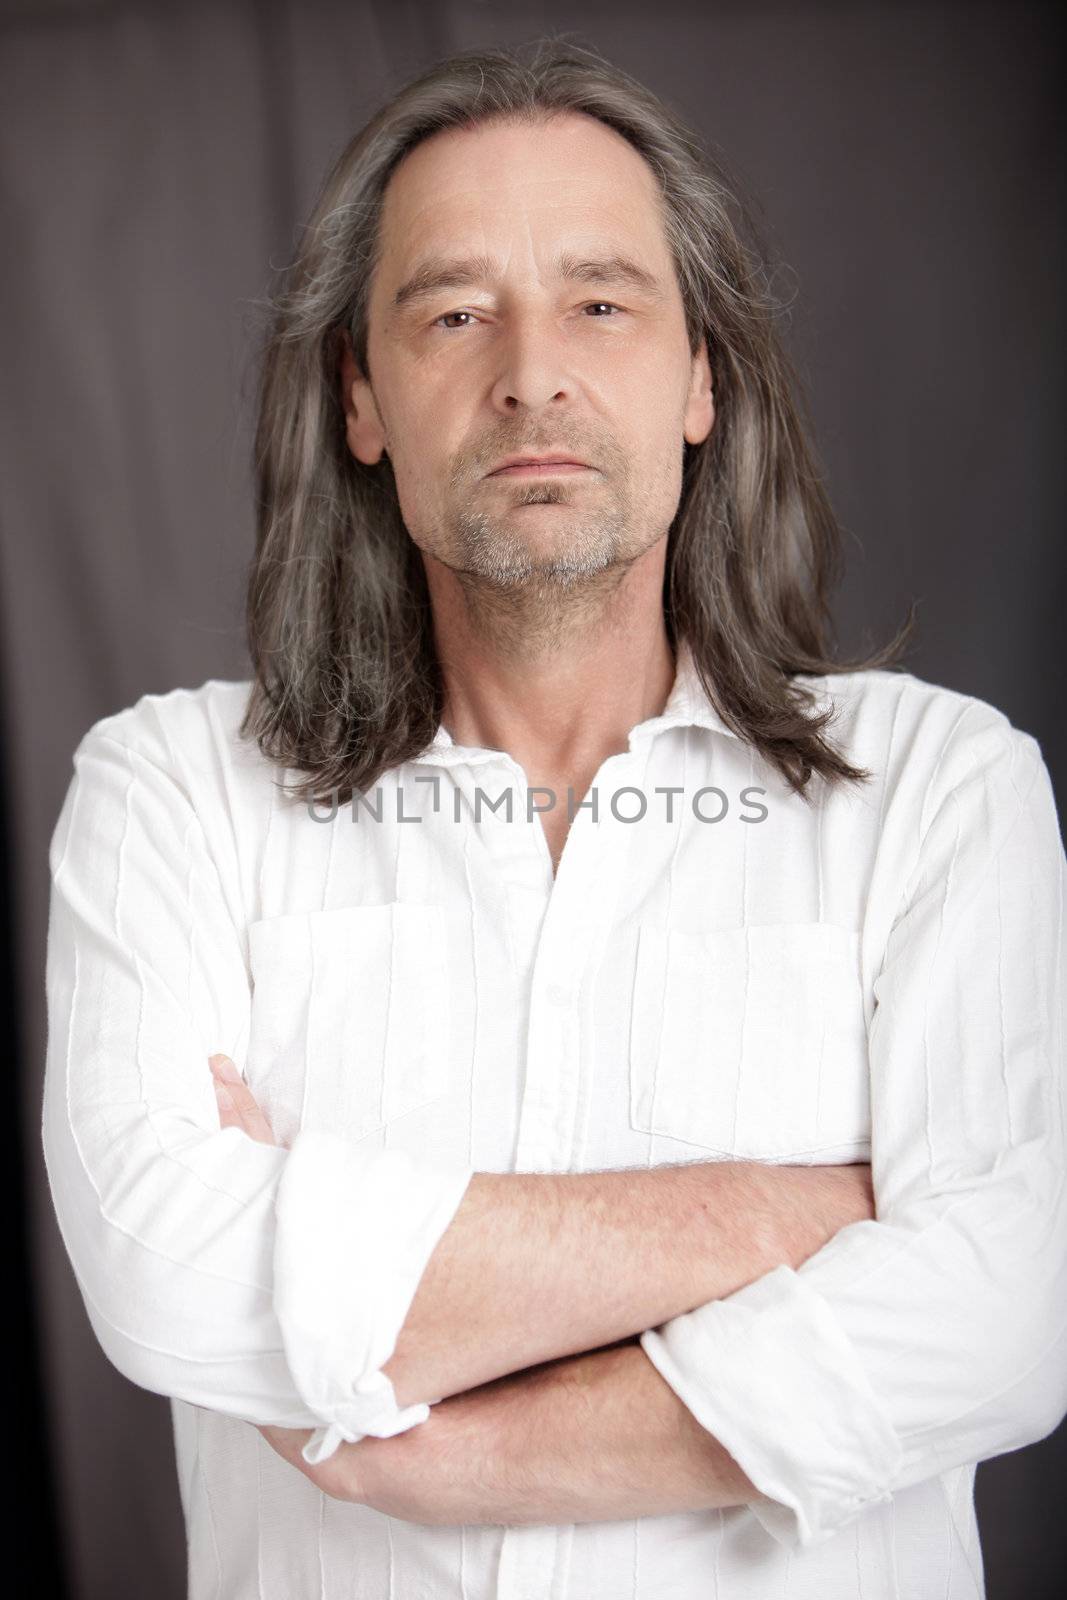 Serious middle-aged man with shoulder length hair standing with his arms folded looking at the camera, upper body studio portrait